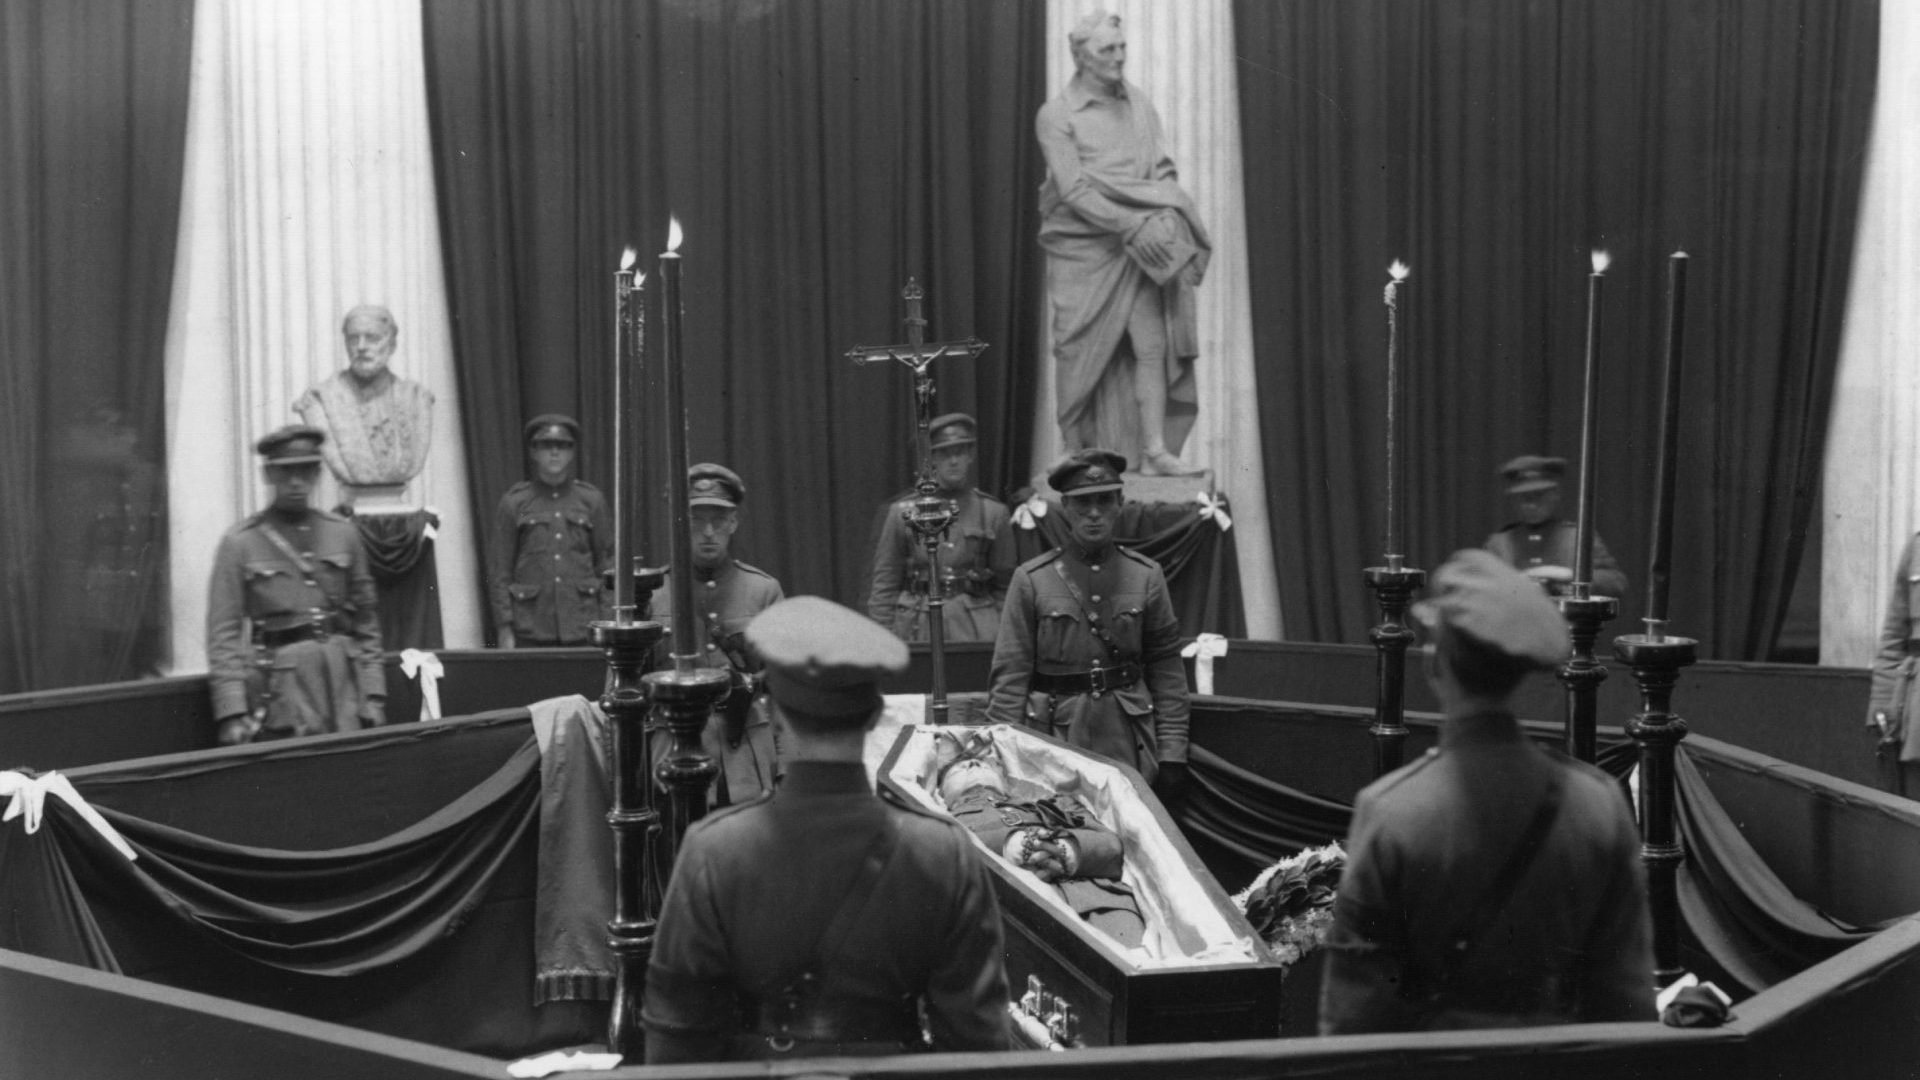 Michael Collins lying in state in Dublin, after his death in an ambush in County Cork. Photo: Central Press/Getty